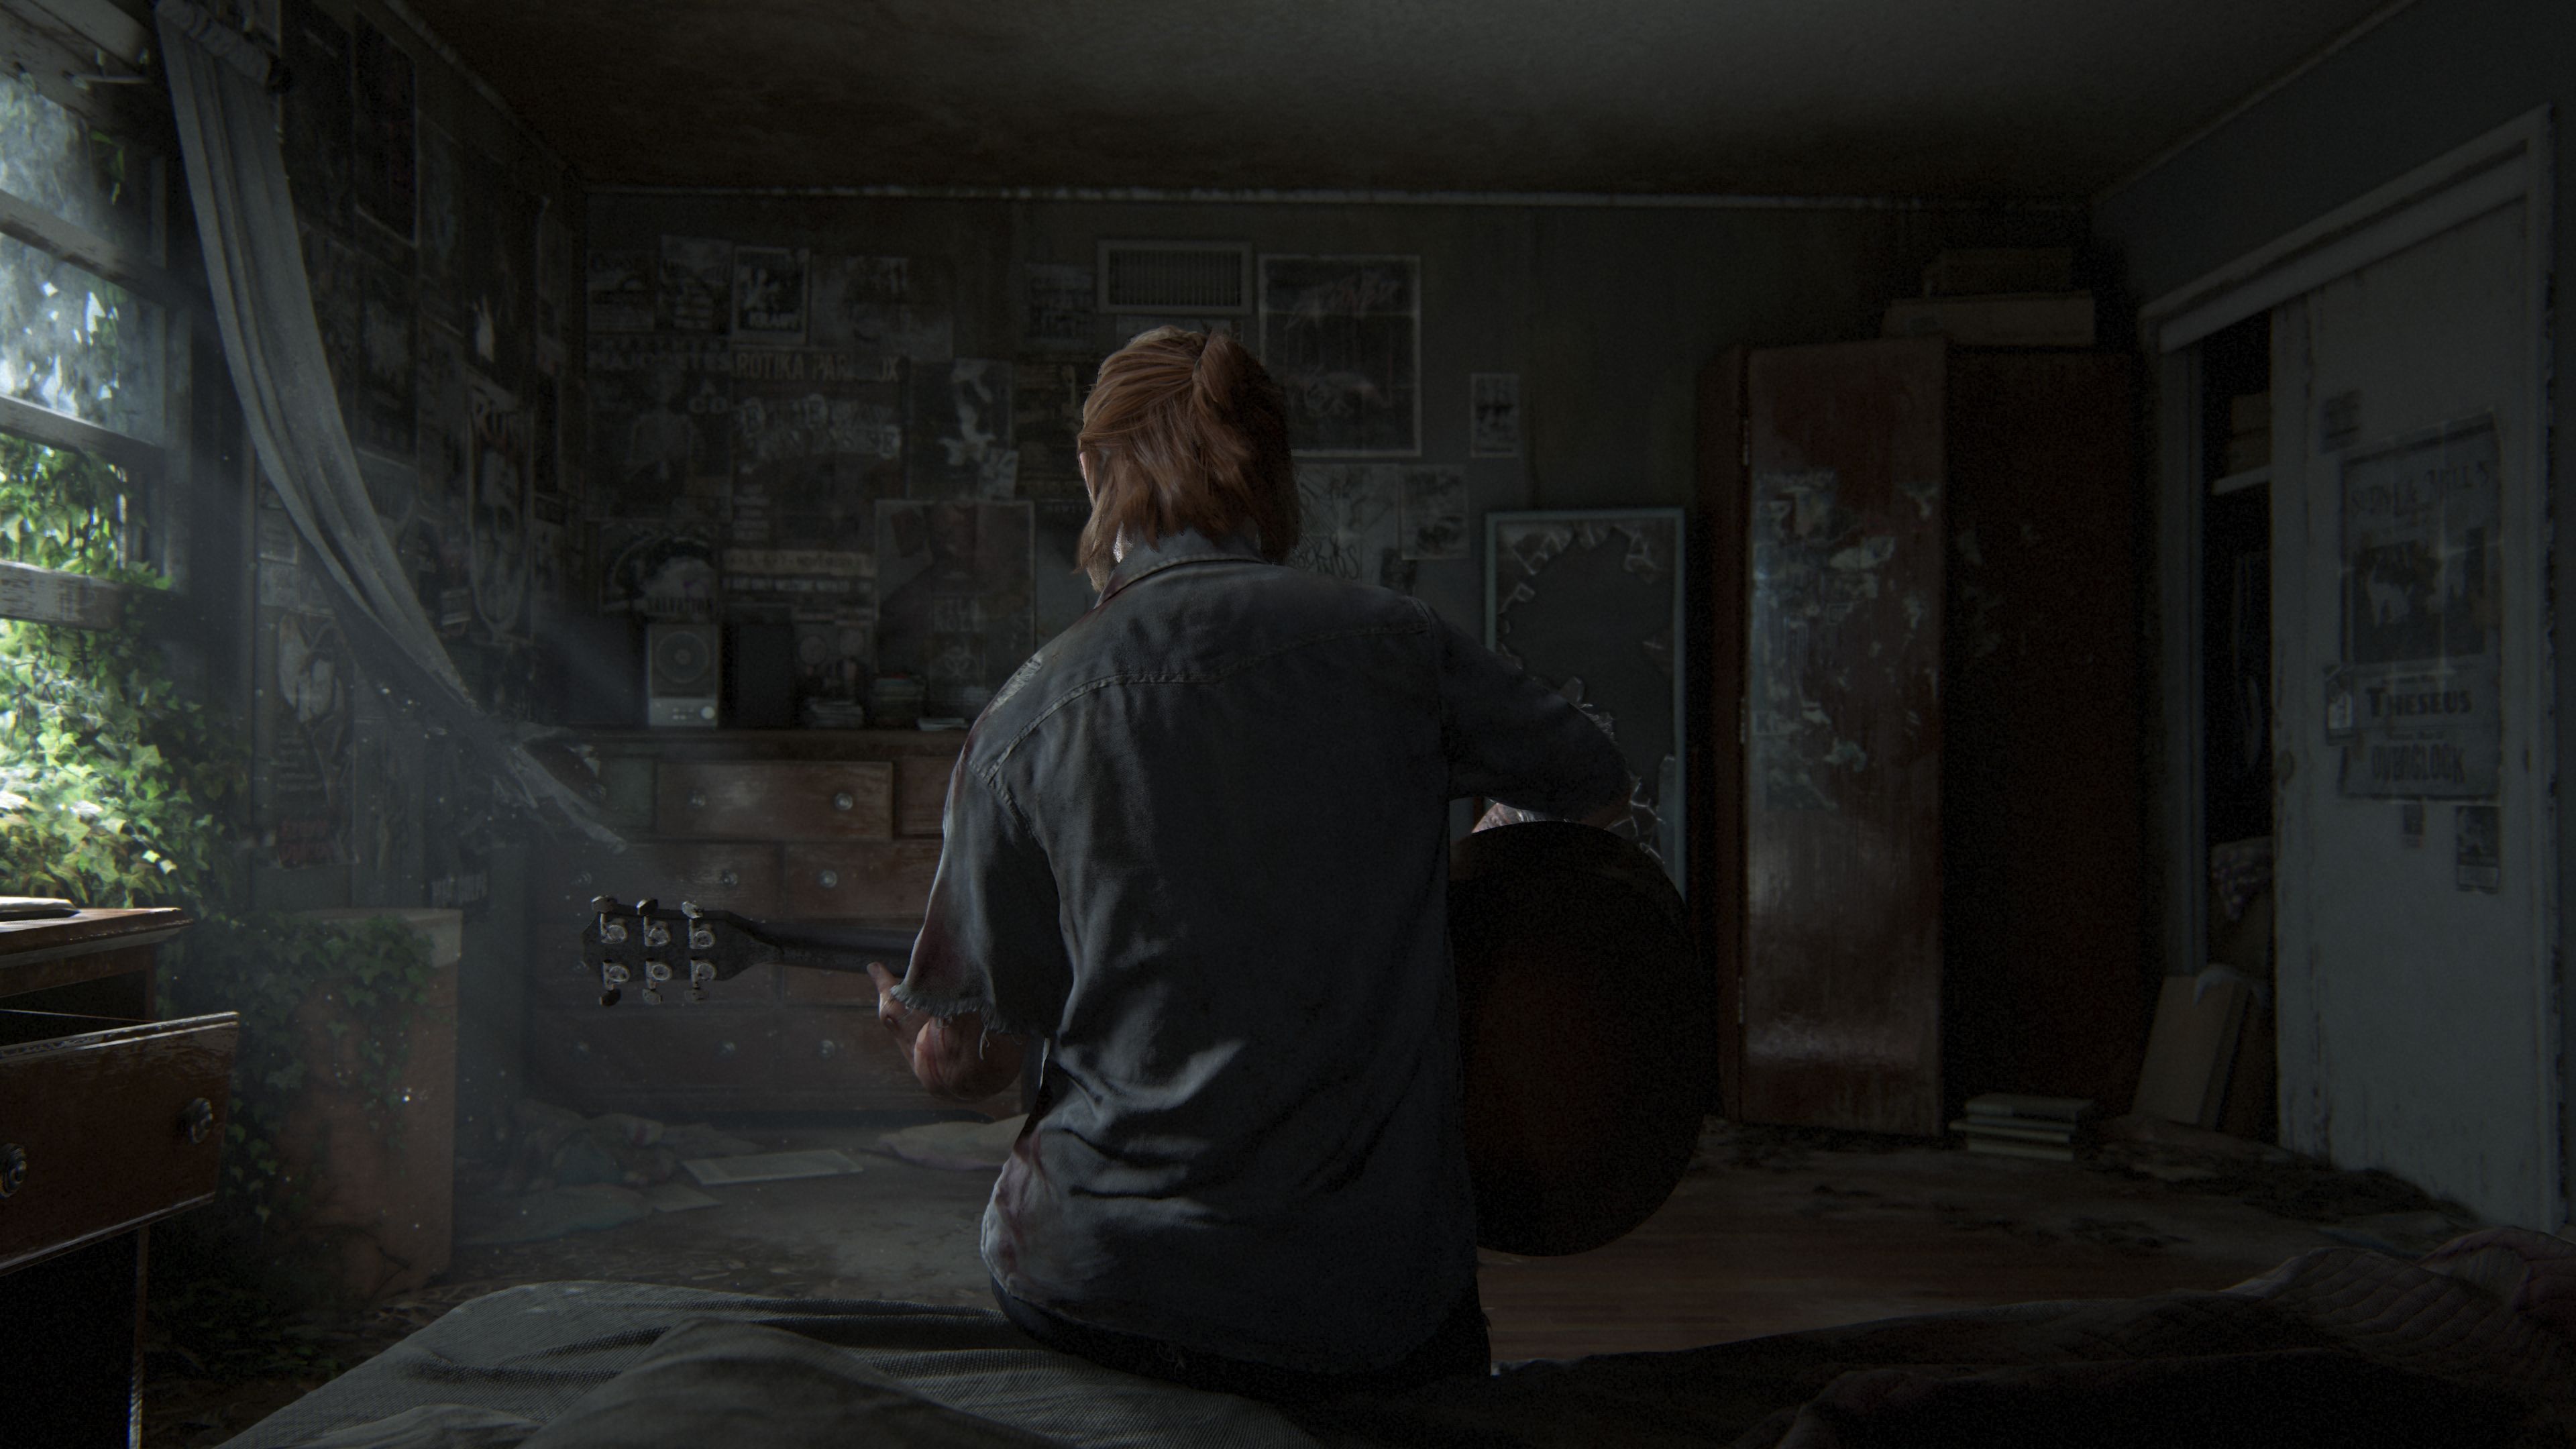 The Last of Us 2 Wallpapers   Top Free The Last of Us 2